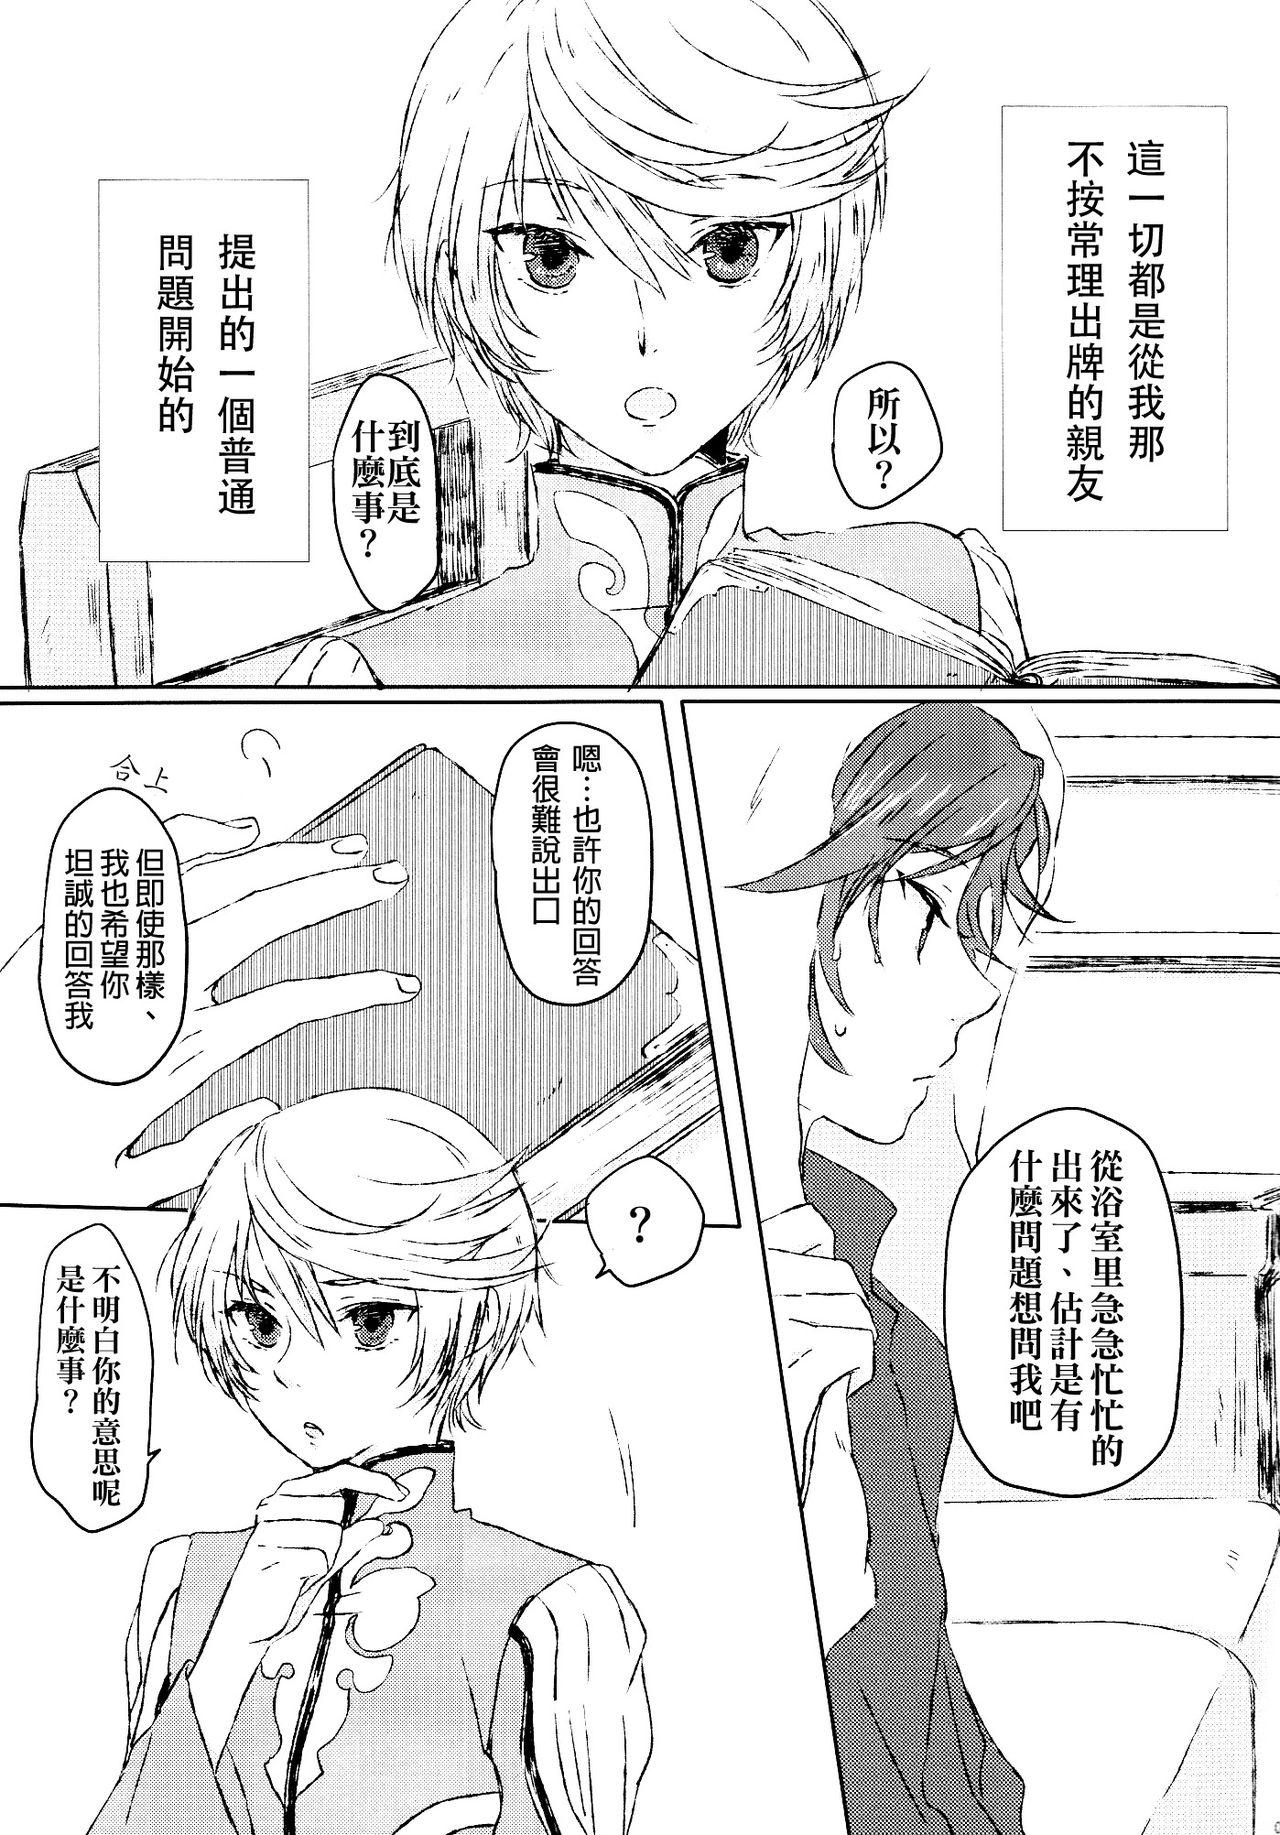 Finger Chiguhagu Syndrome - Tales of zestiria Jav - Page 5